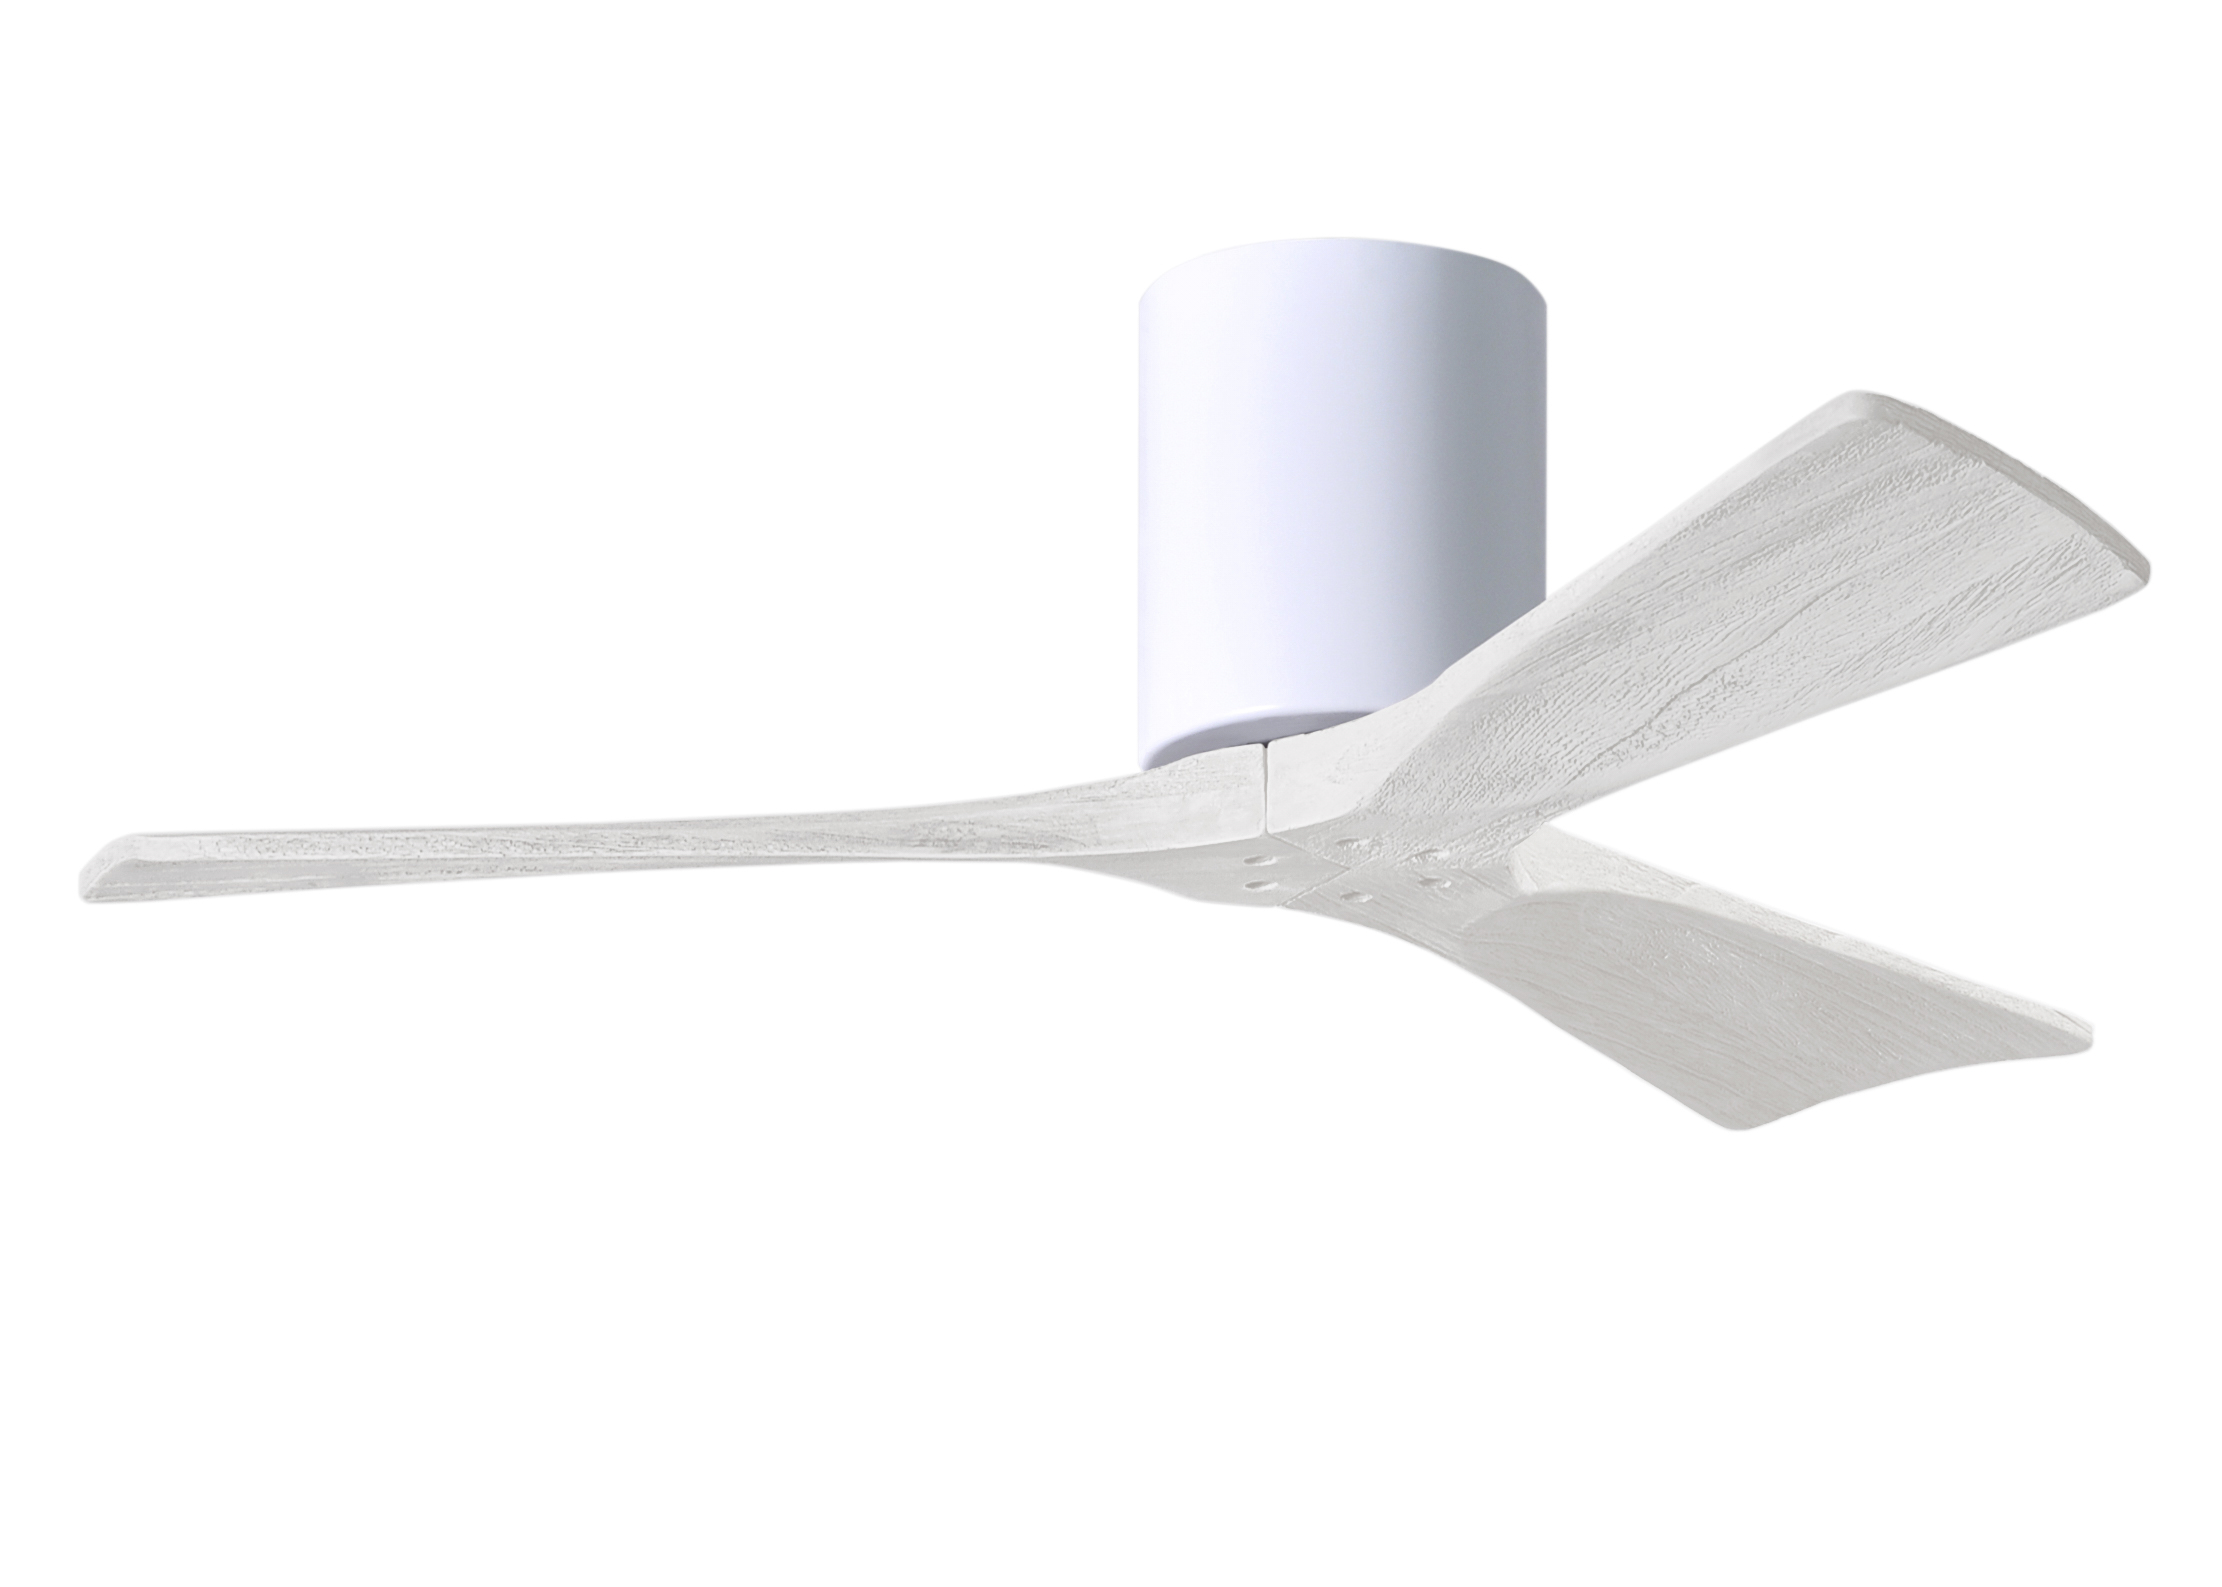 Irene-3H Ceiling Fan in Gloss White Finish with 42